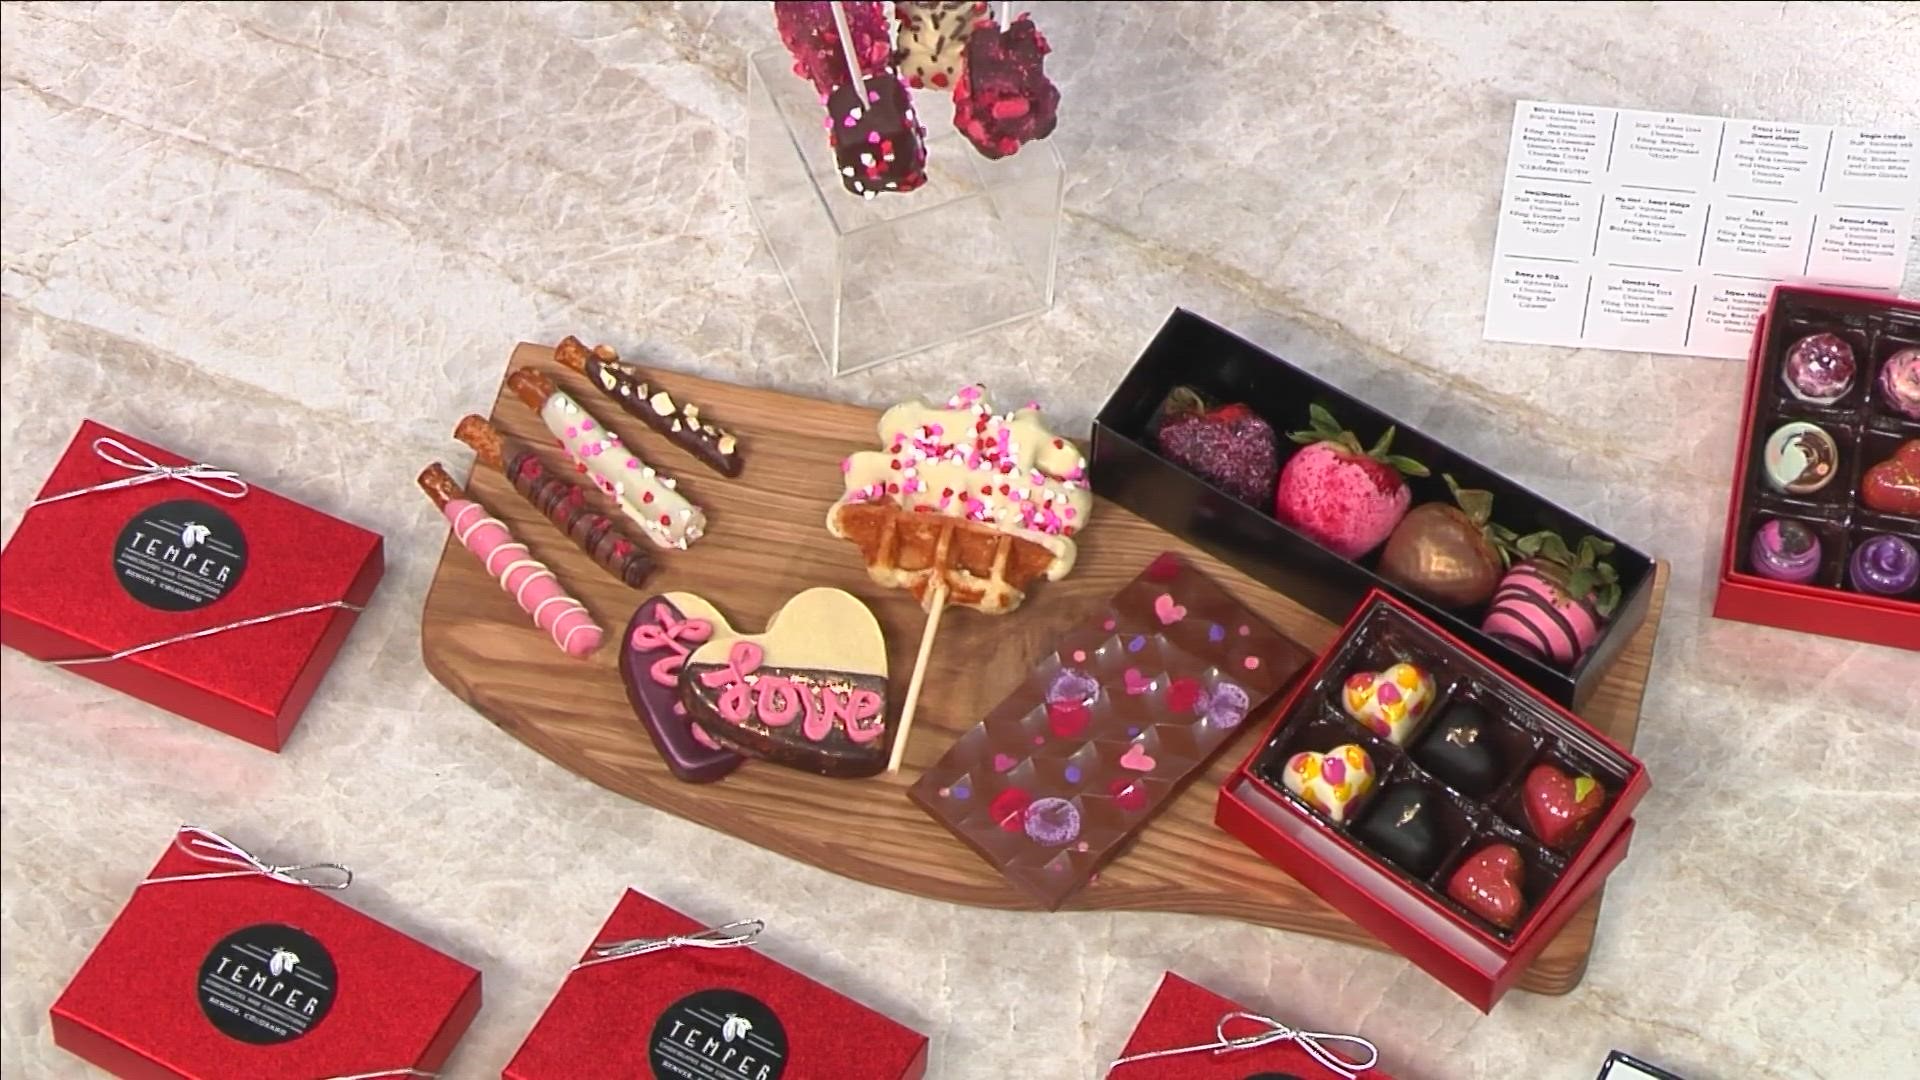 Temper Chocolates is putting a fun twist on the classic charcuterie board by making a chocolate themed one perfect for Valentine's Day.